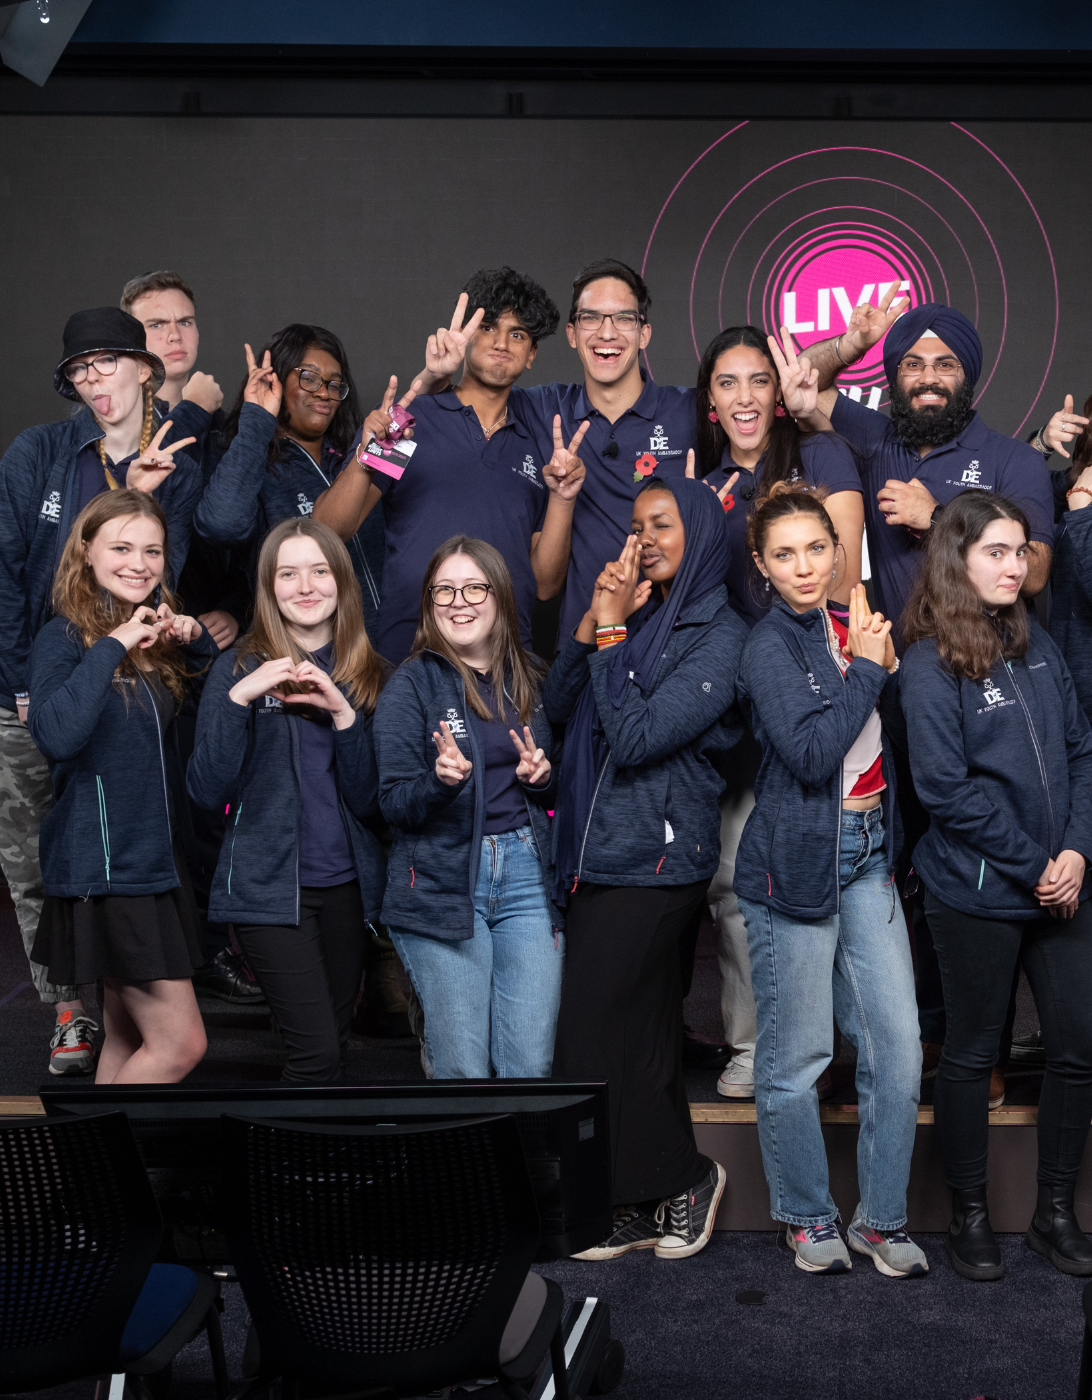 A group of 13 DofE UK Youth Ambassadors standing on stage at the DofE's Youth Without Limits LIVE event. They are all wearing matching navy fleeces, doing different poses and looking directly to the camera.